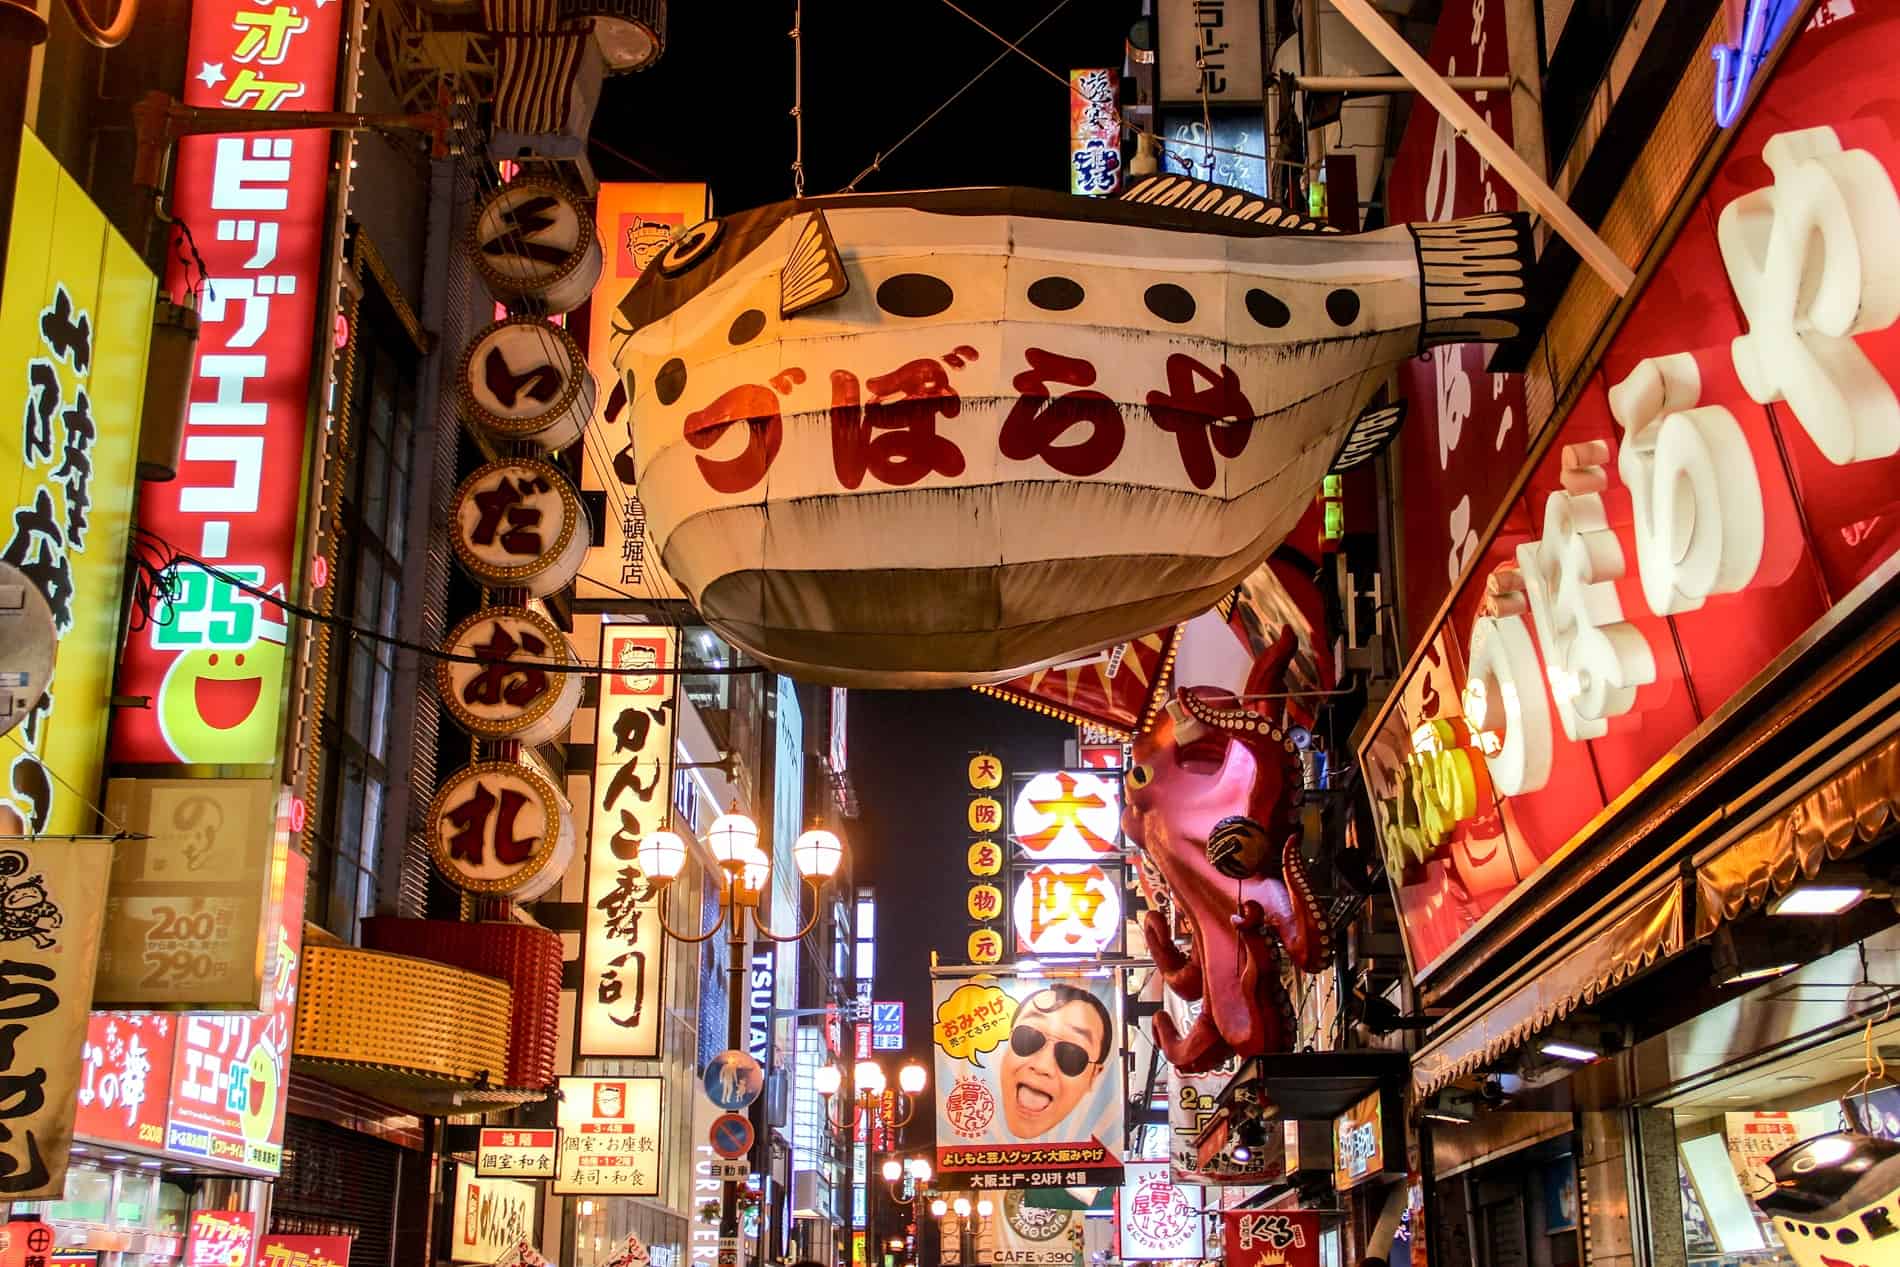 The Dotonburi area of Osaka at night. Buildings are entirely covered in lit-up signs, a giant white pufferfish hangs on a wire in the middle, and a giant pink octopus is stuck to a building on the right. 